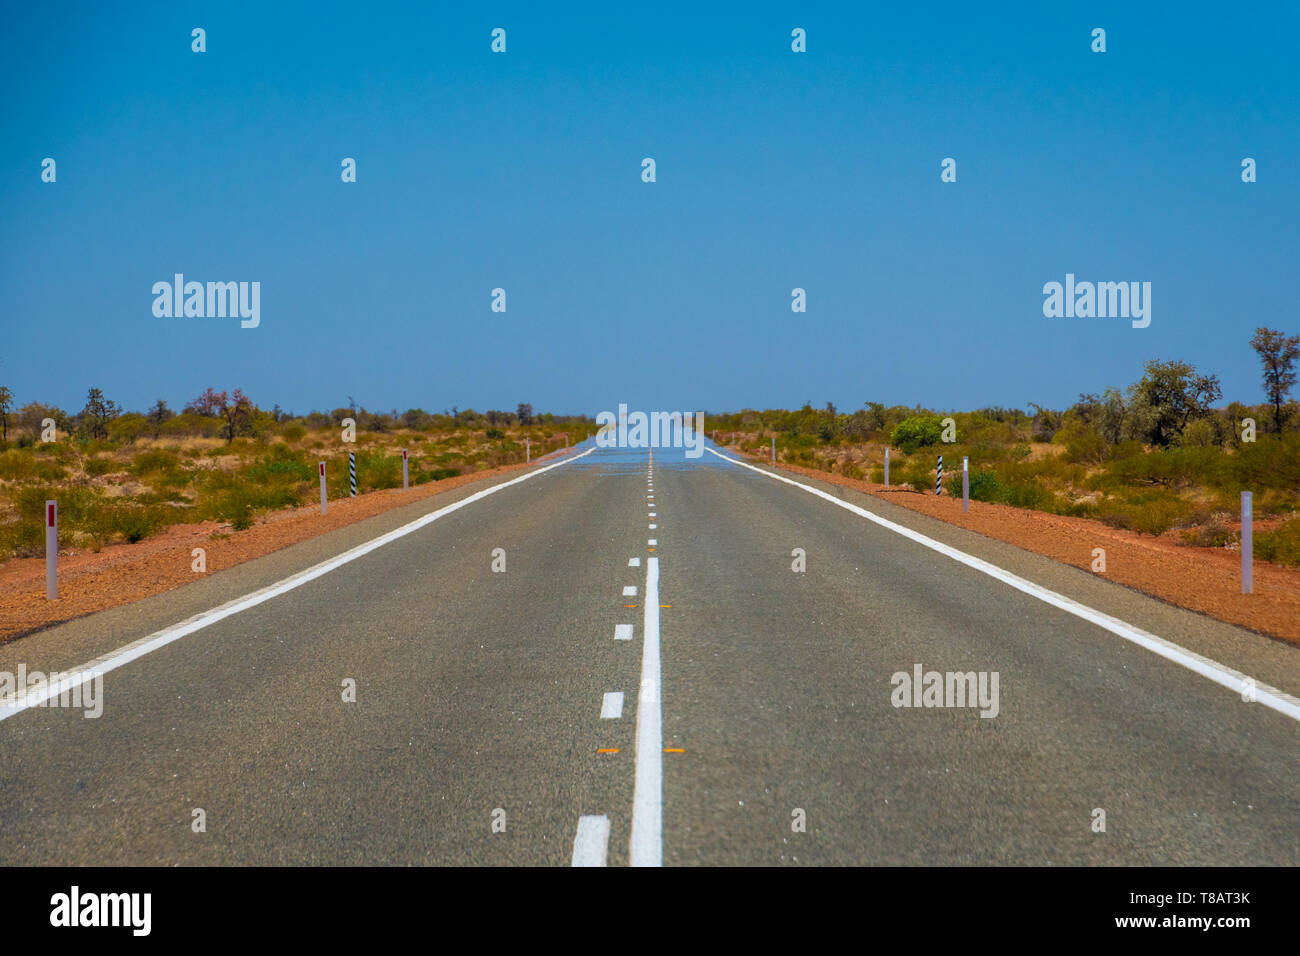 Mirage over straight endless road in Australia merging asphalt and sky Stock Photo